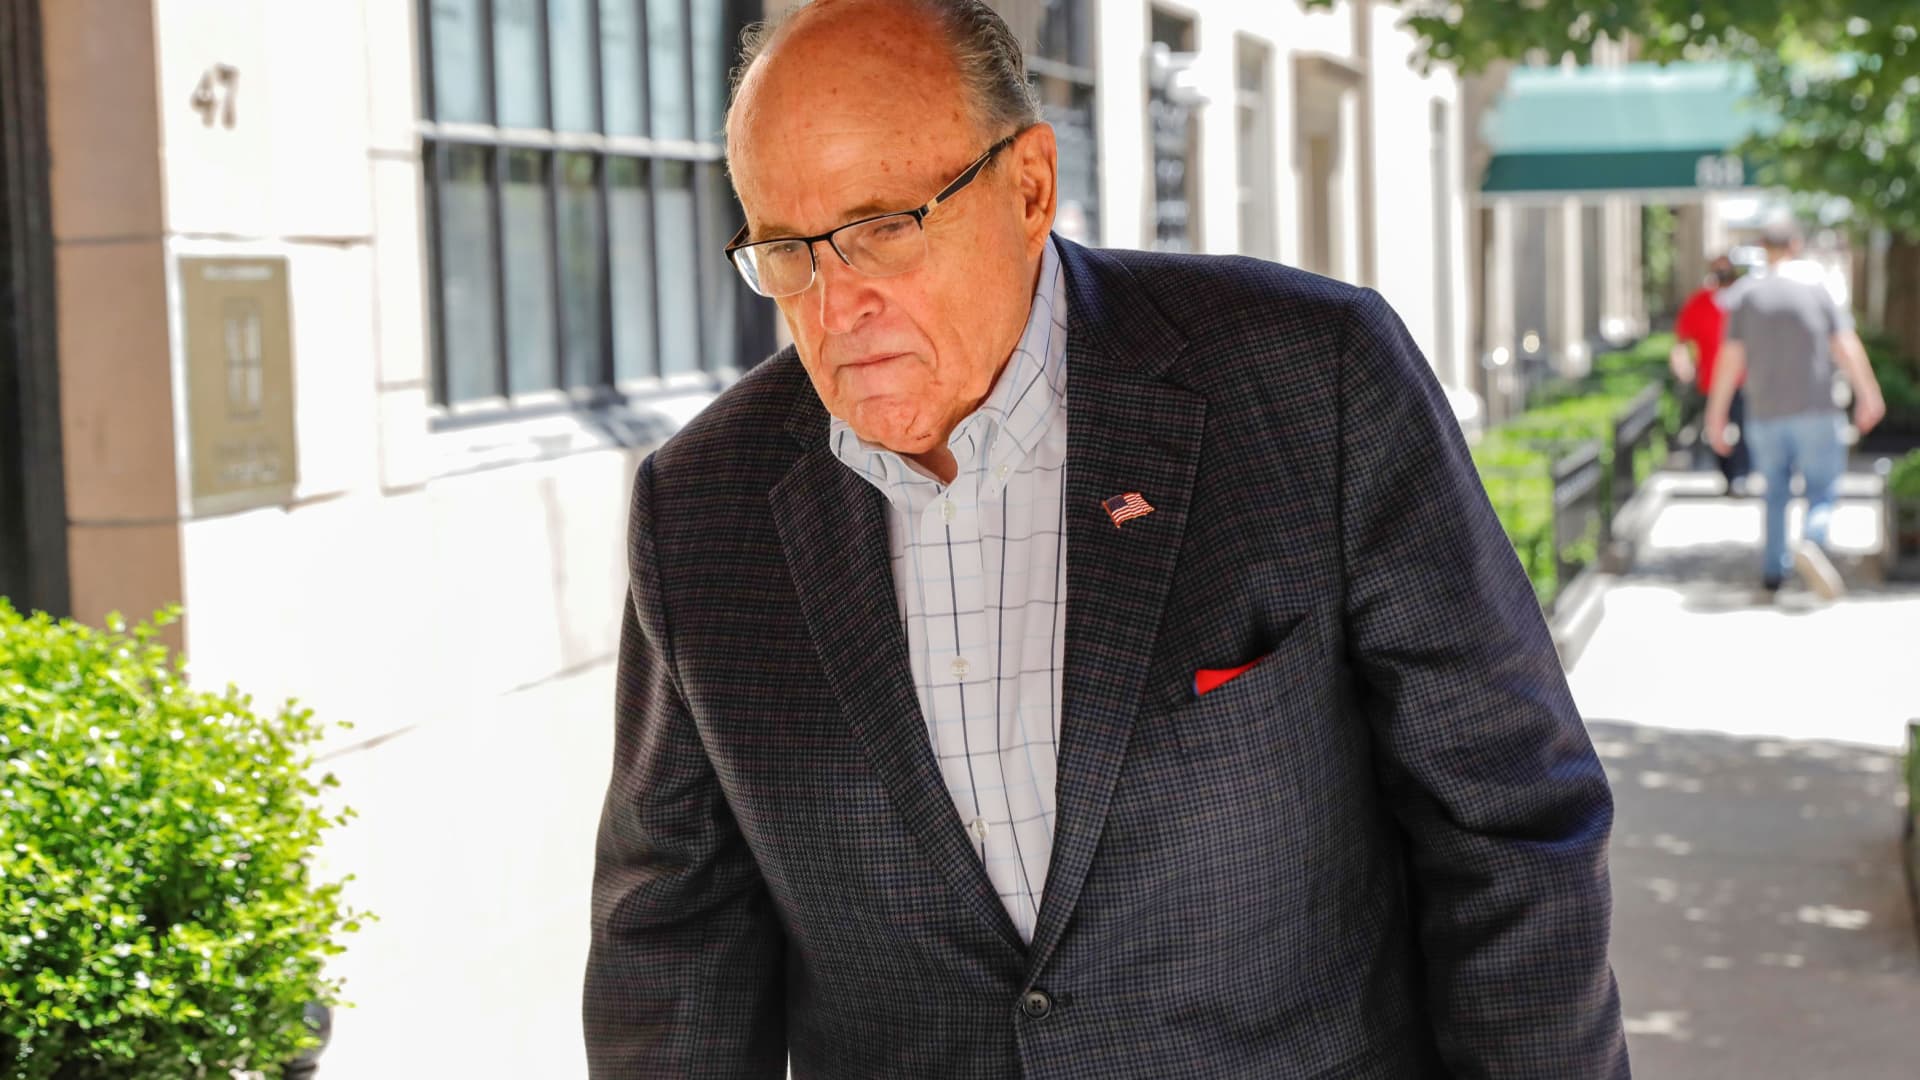 Former New York City Mayor Rudy Giuliani arrives at his apartment building after the suspension of his law license in Manhattan in New York City, New York, June 24, 2021.